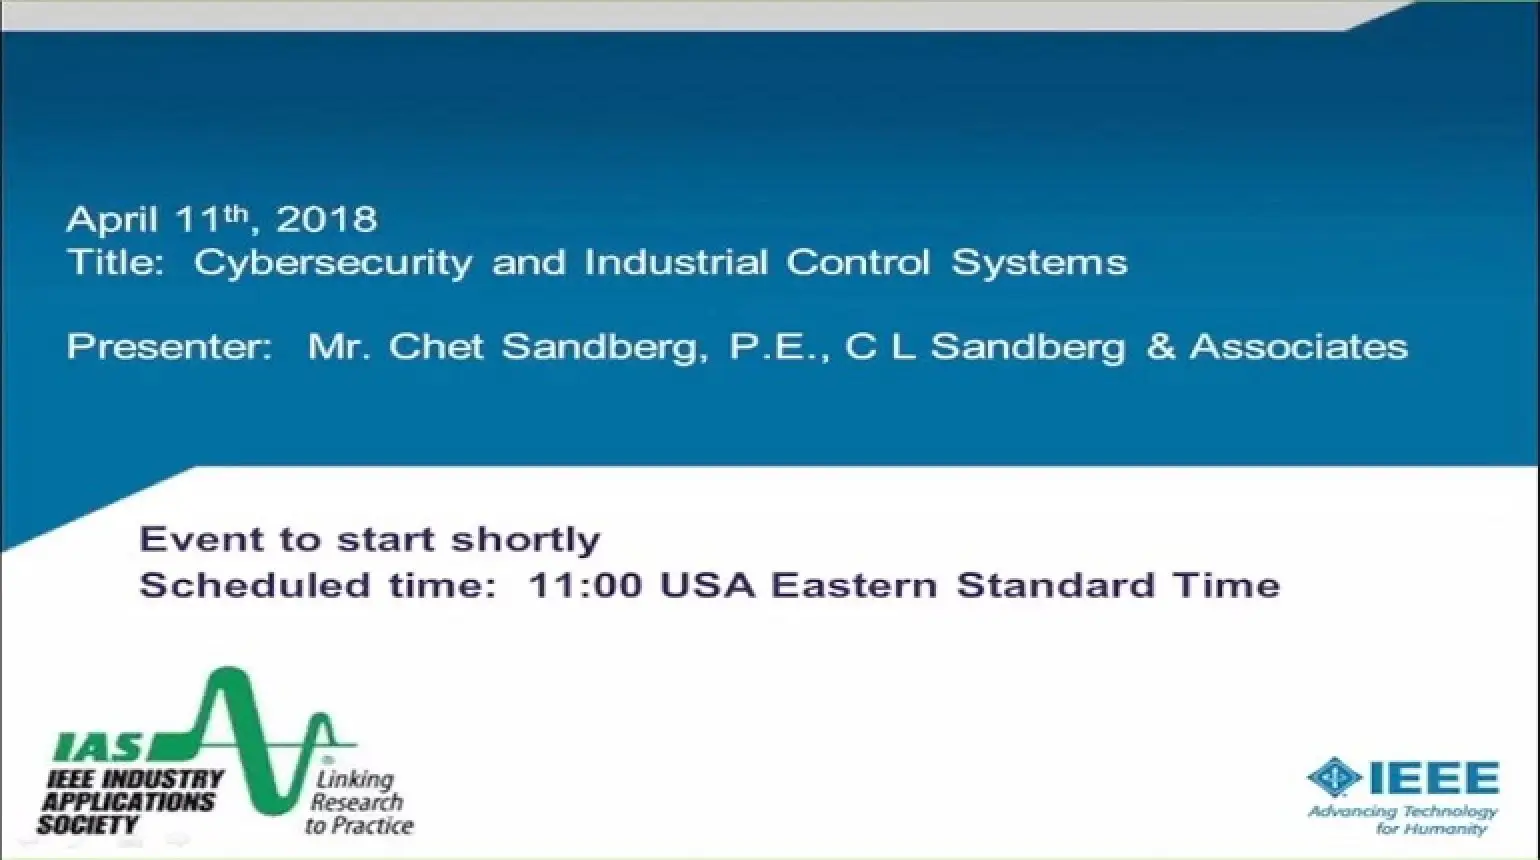 IAS Webinar Series - Cybersecurity and Industrial Control Systems